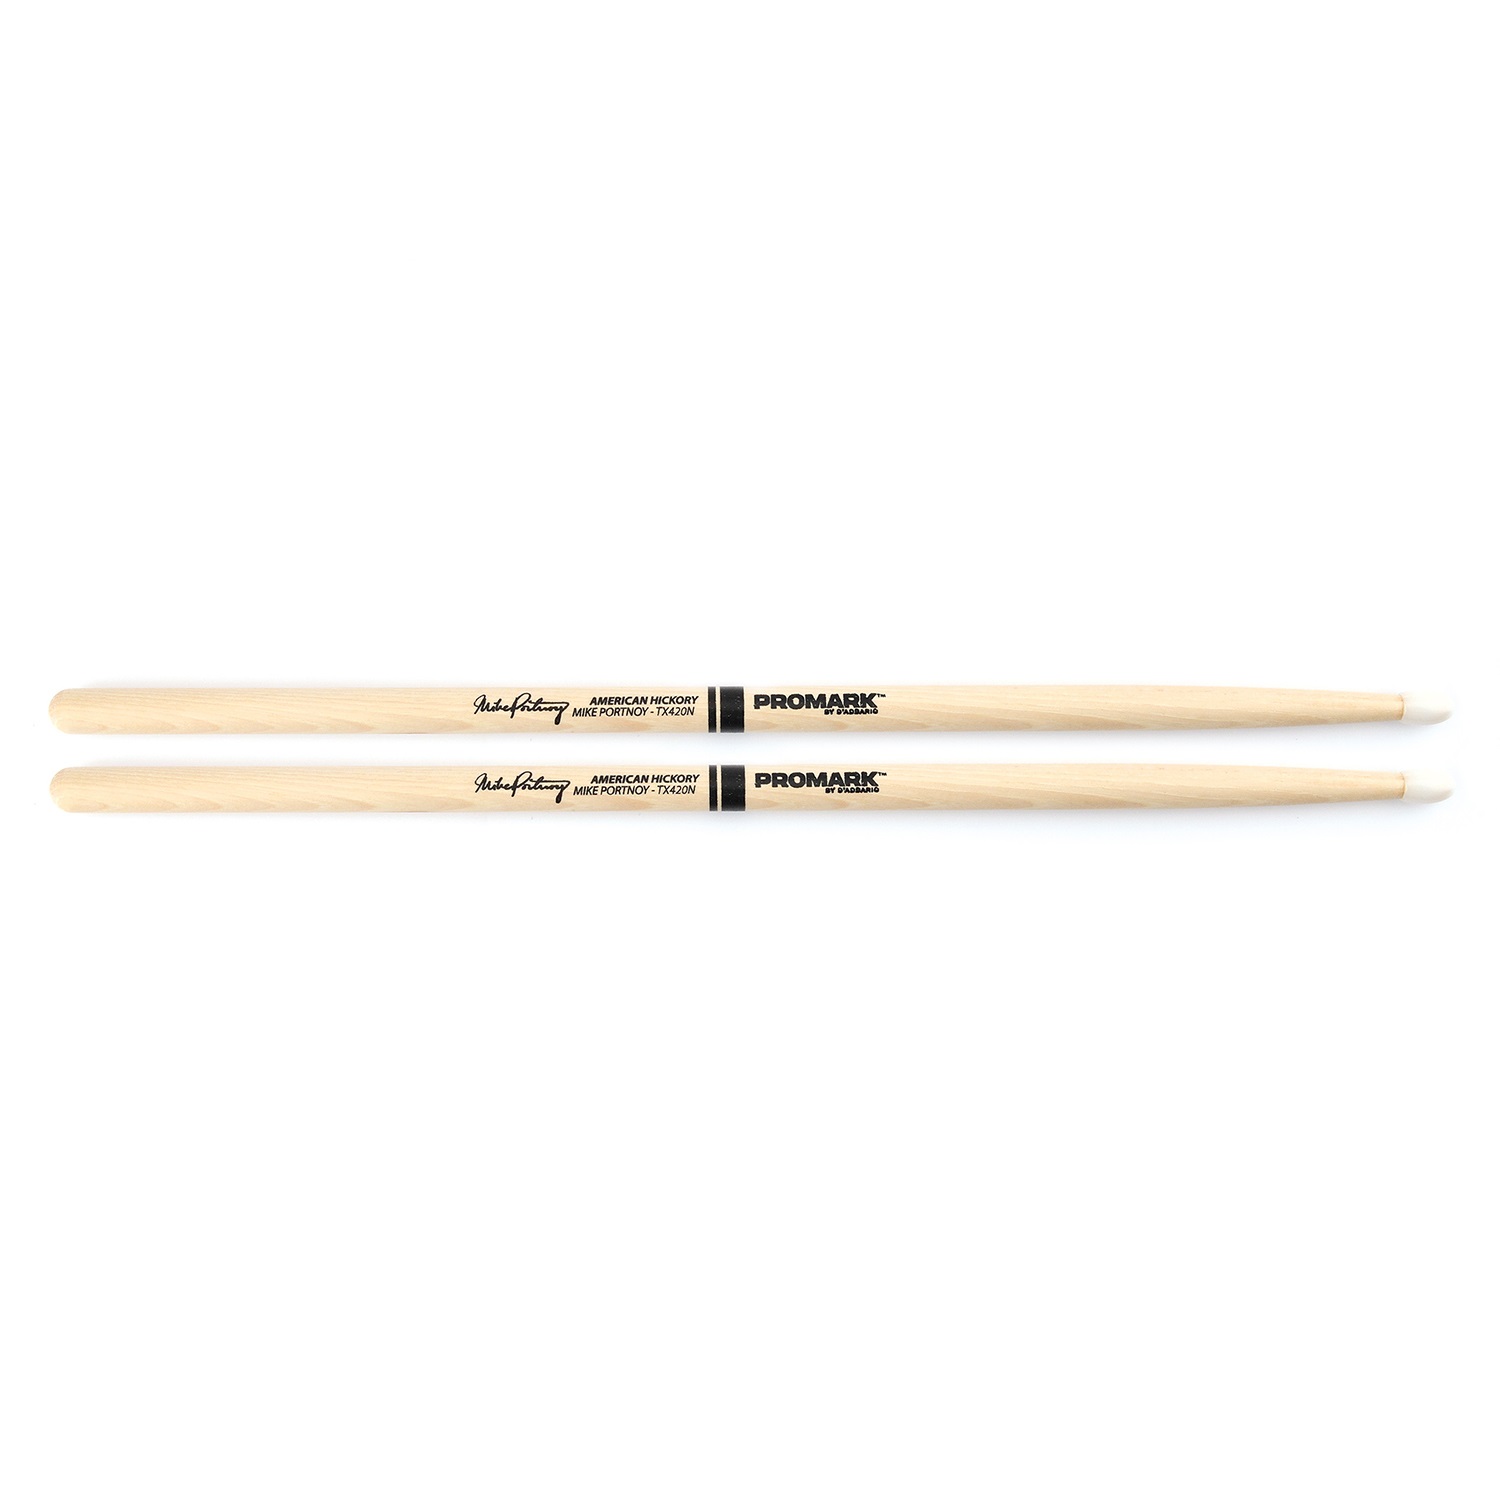 An image of Promark Hickory 420 Mike Portnoy Nylon Tip Drumstick Pair